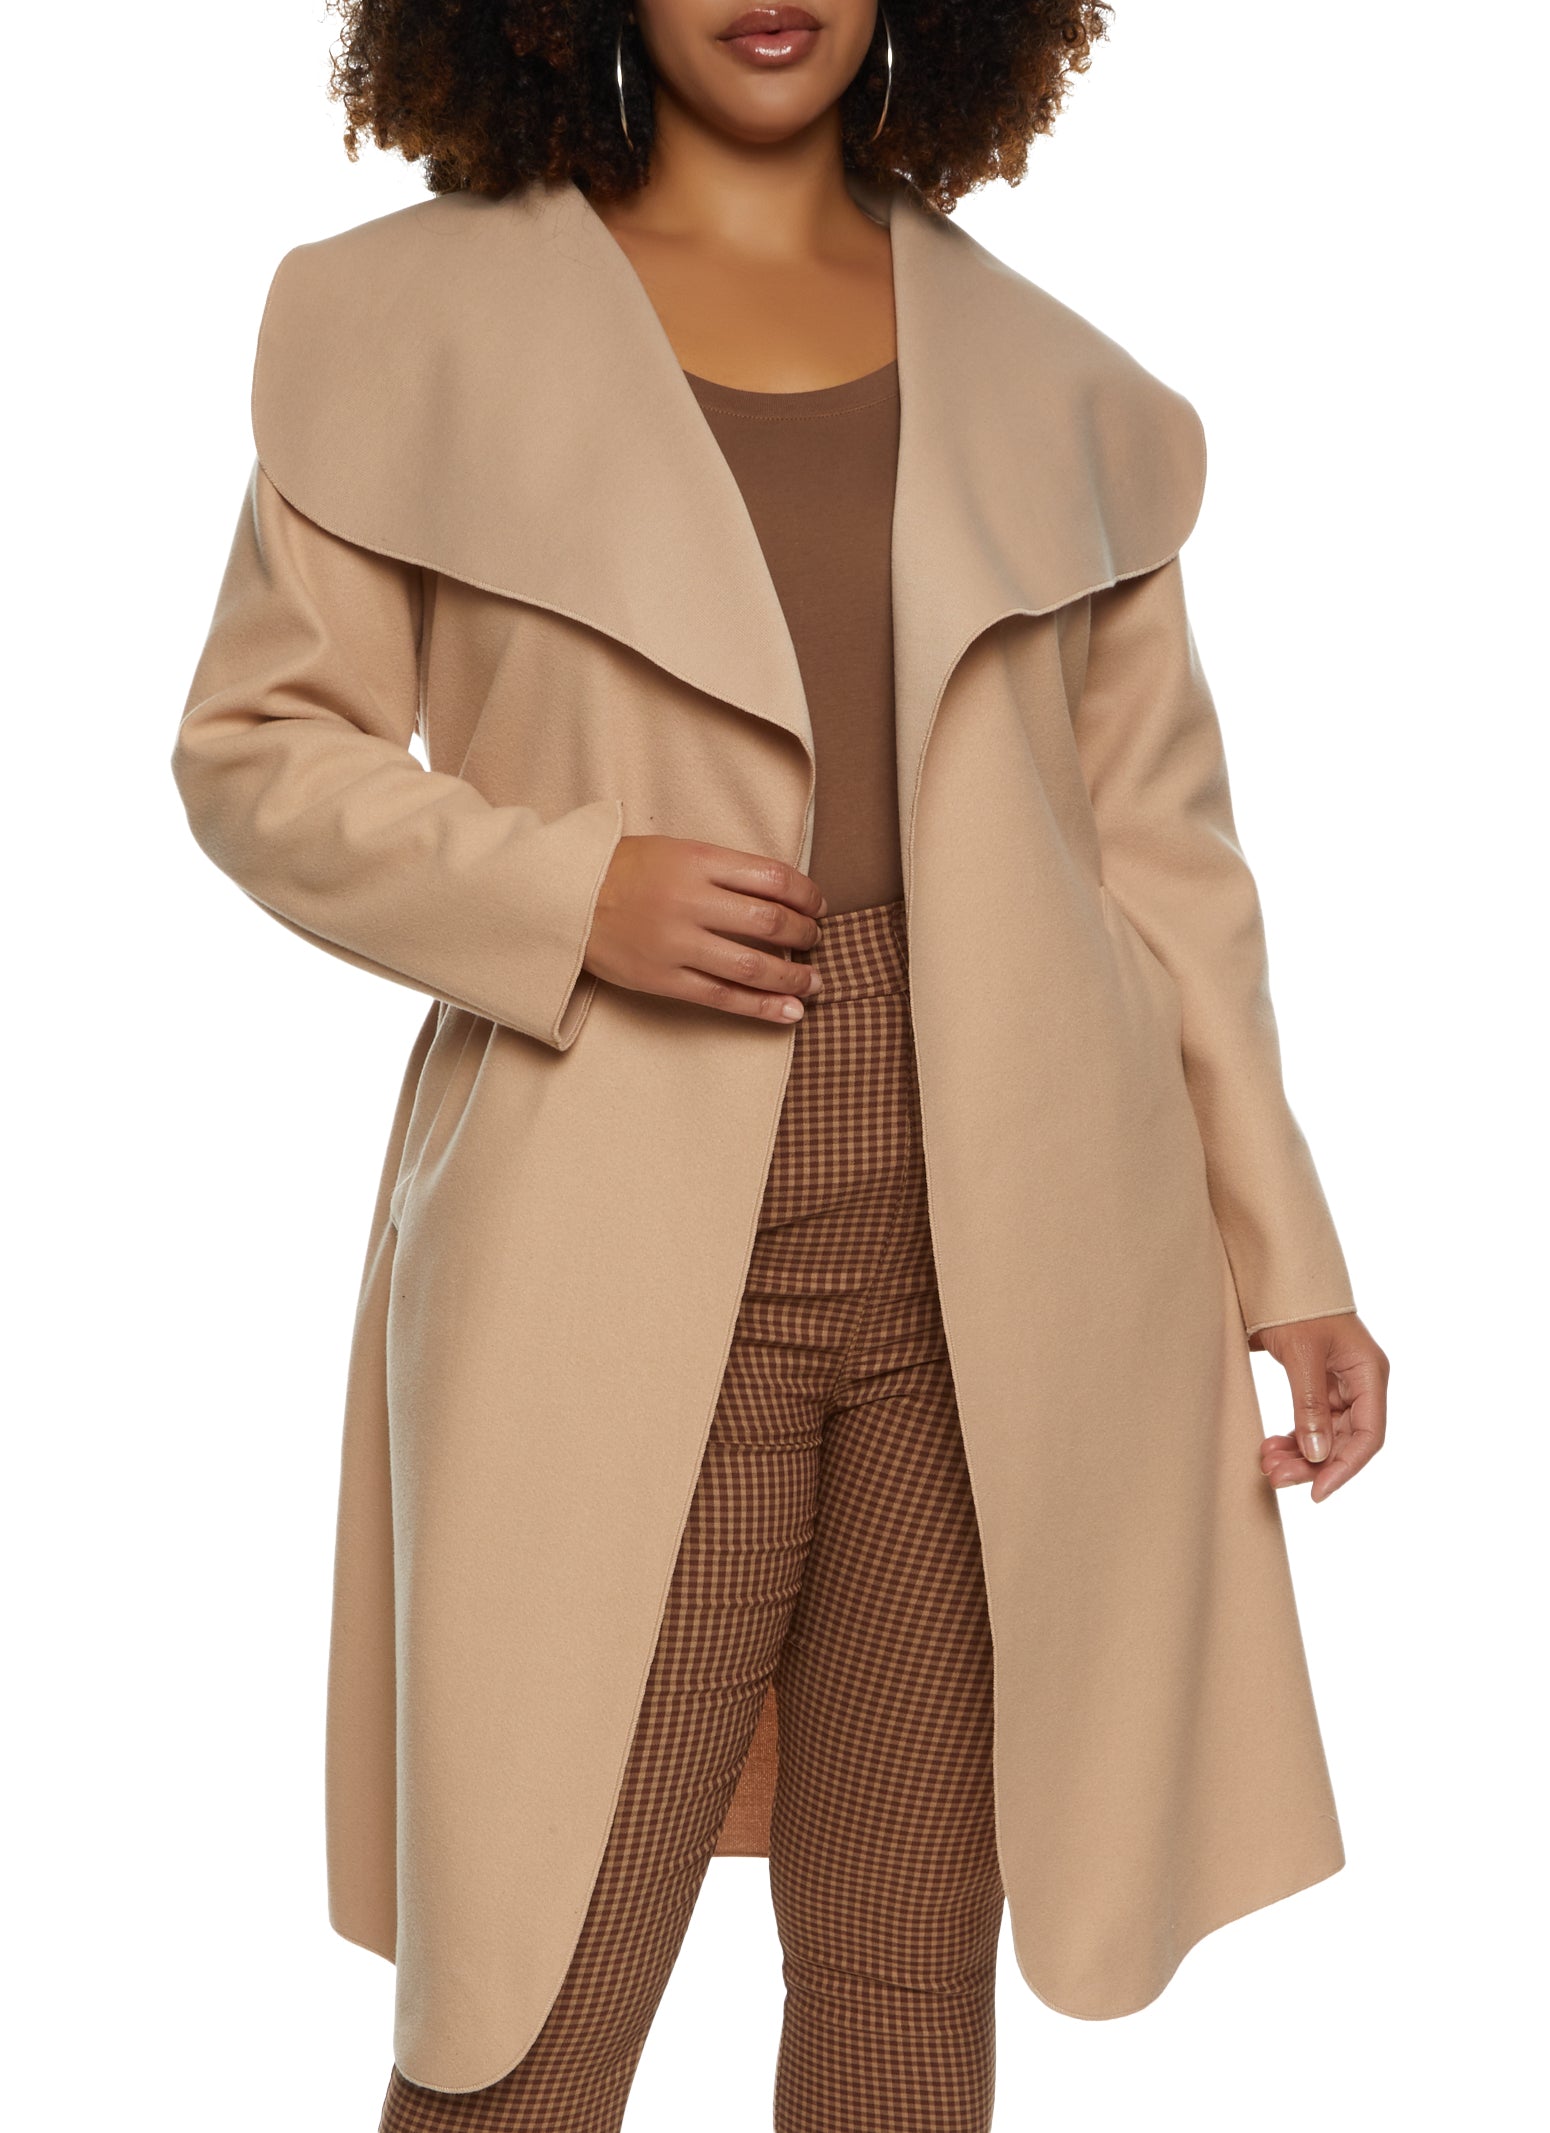 Womens Plus Size Solid Belted Wrap Coat, Beige, Size 1X